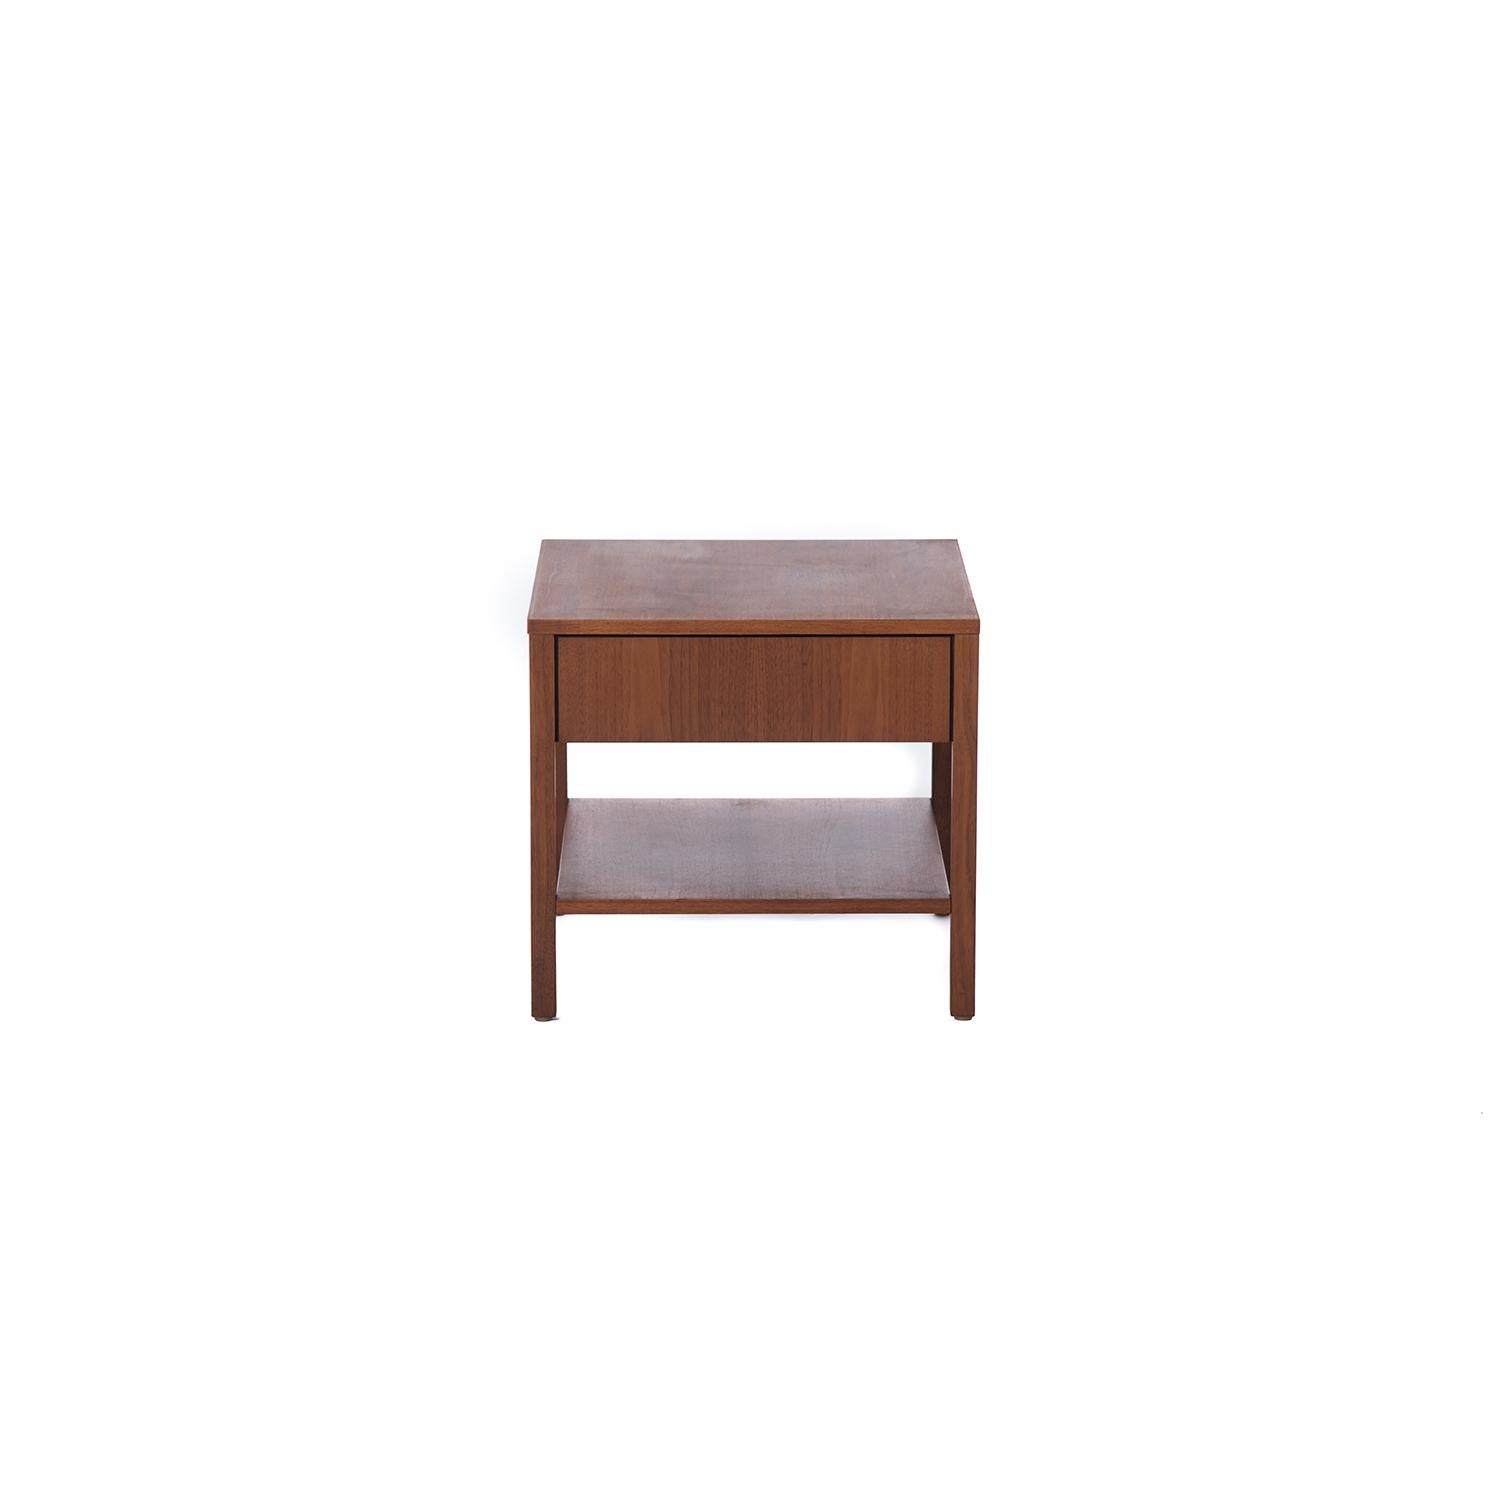 American Pair of Side Tables with Drawer or Nightstands in Walnut by Florence Knoll